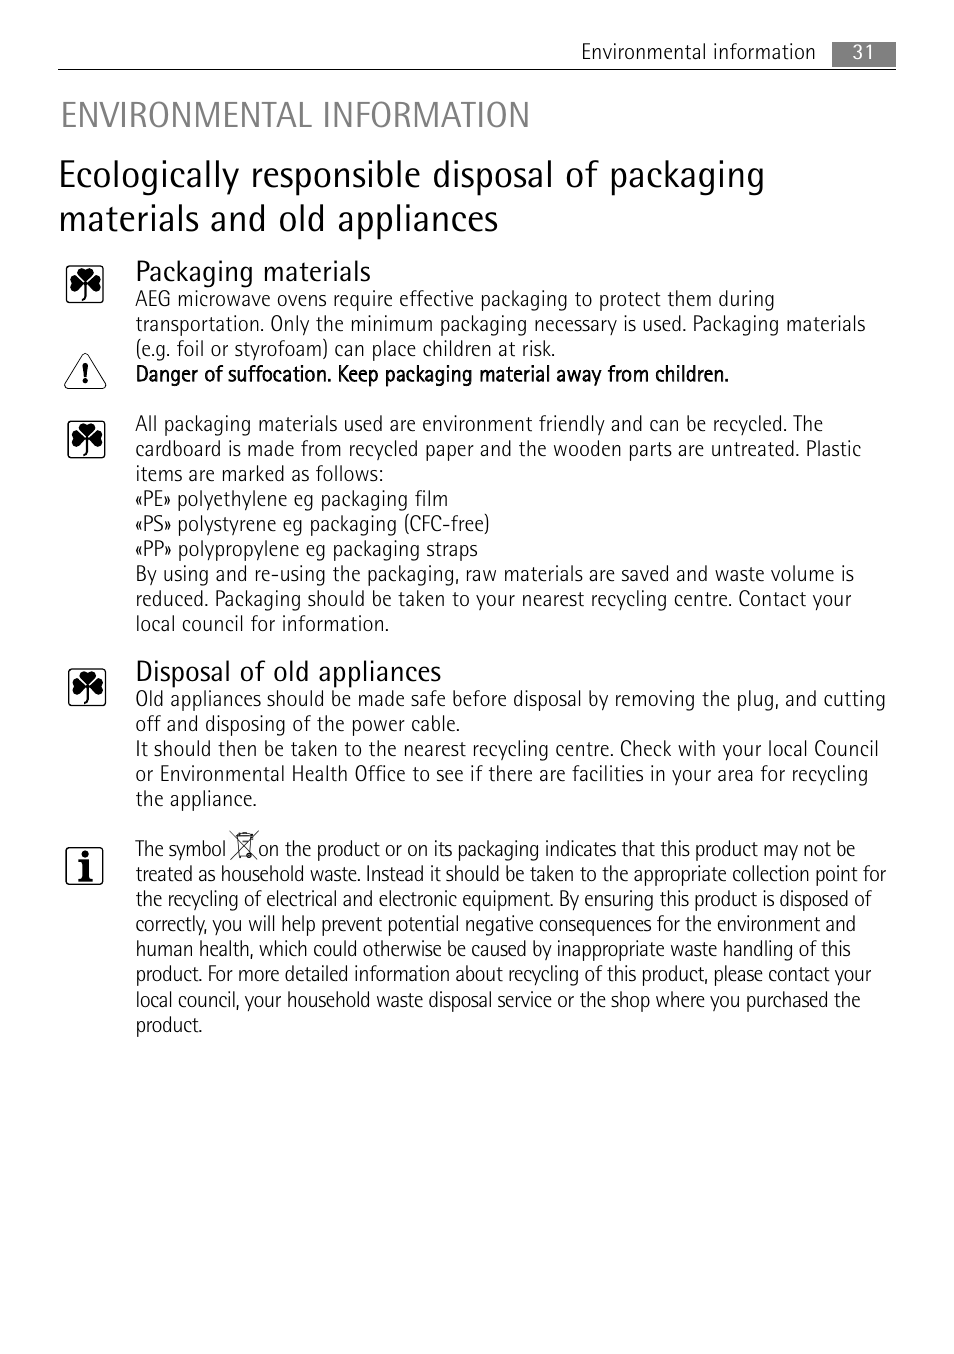 Environmental information, Packaging materials, Disposal of old appliances | AEG MC2664E-W User Manual | Page 31 / 36